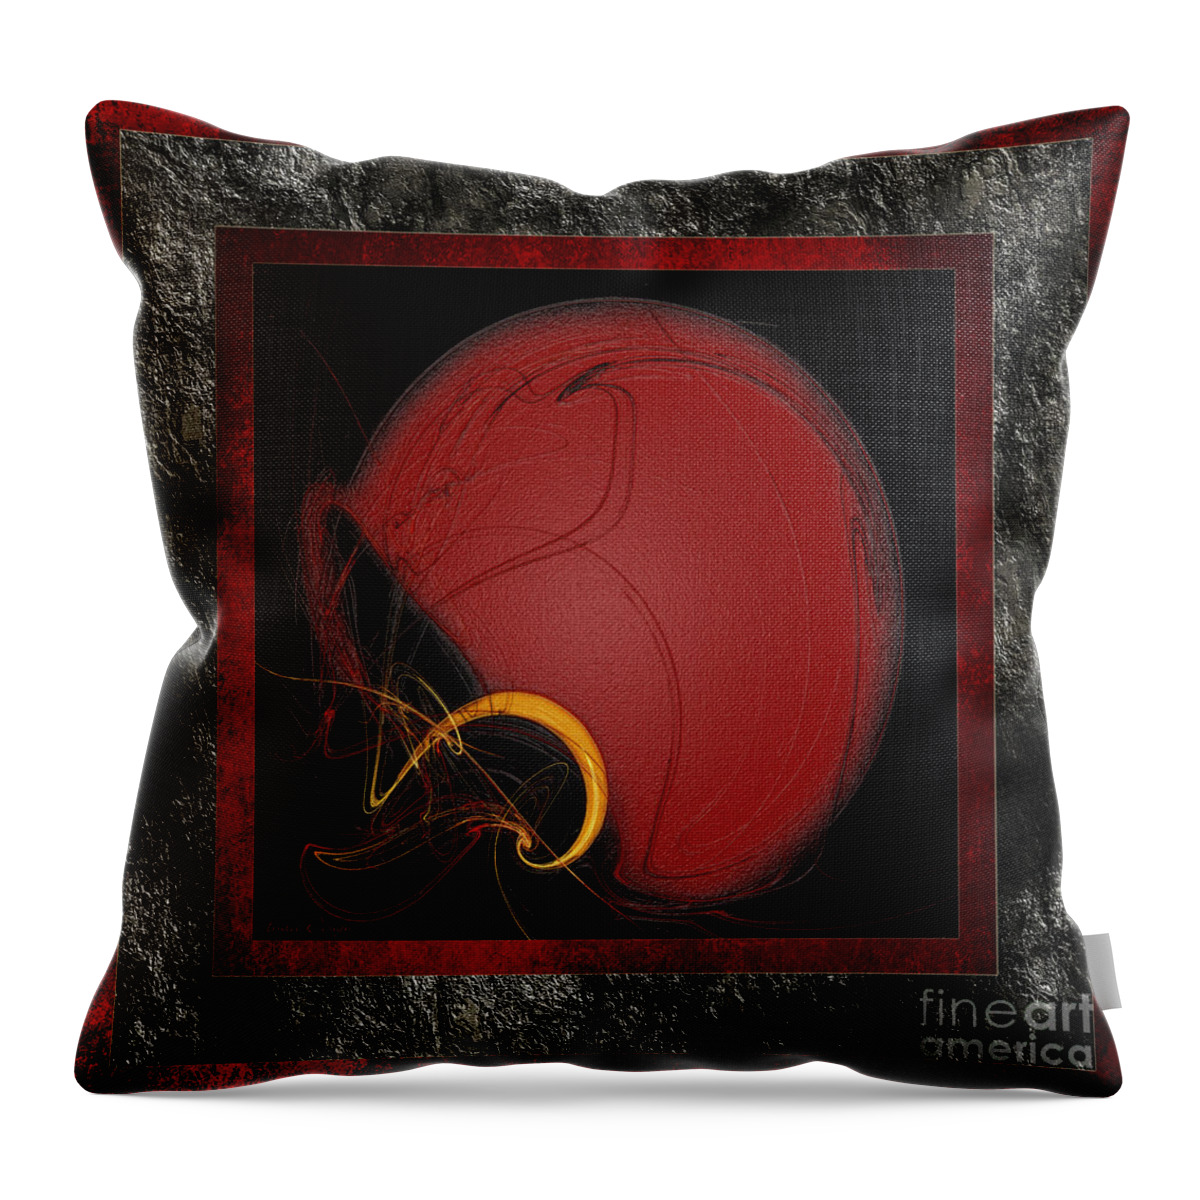 Football Throw Pillow featuring the digital art Red Football Helmet Abstract Frames 1 by Andee Design